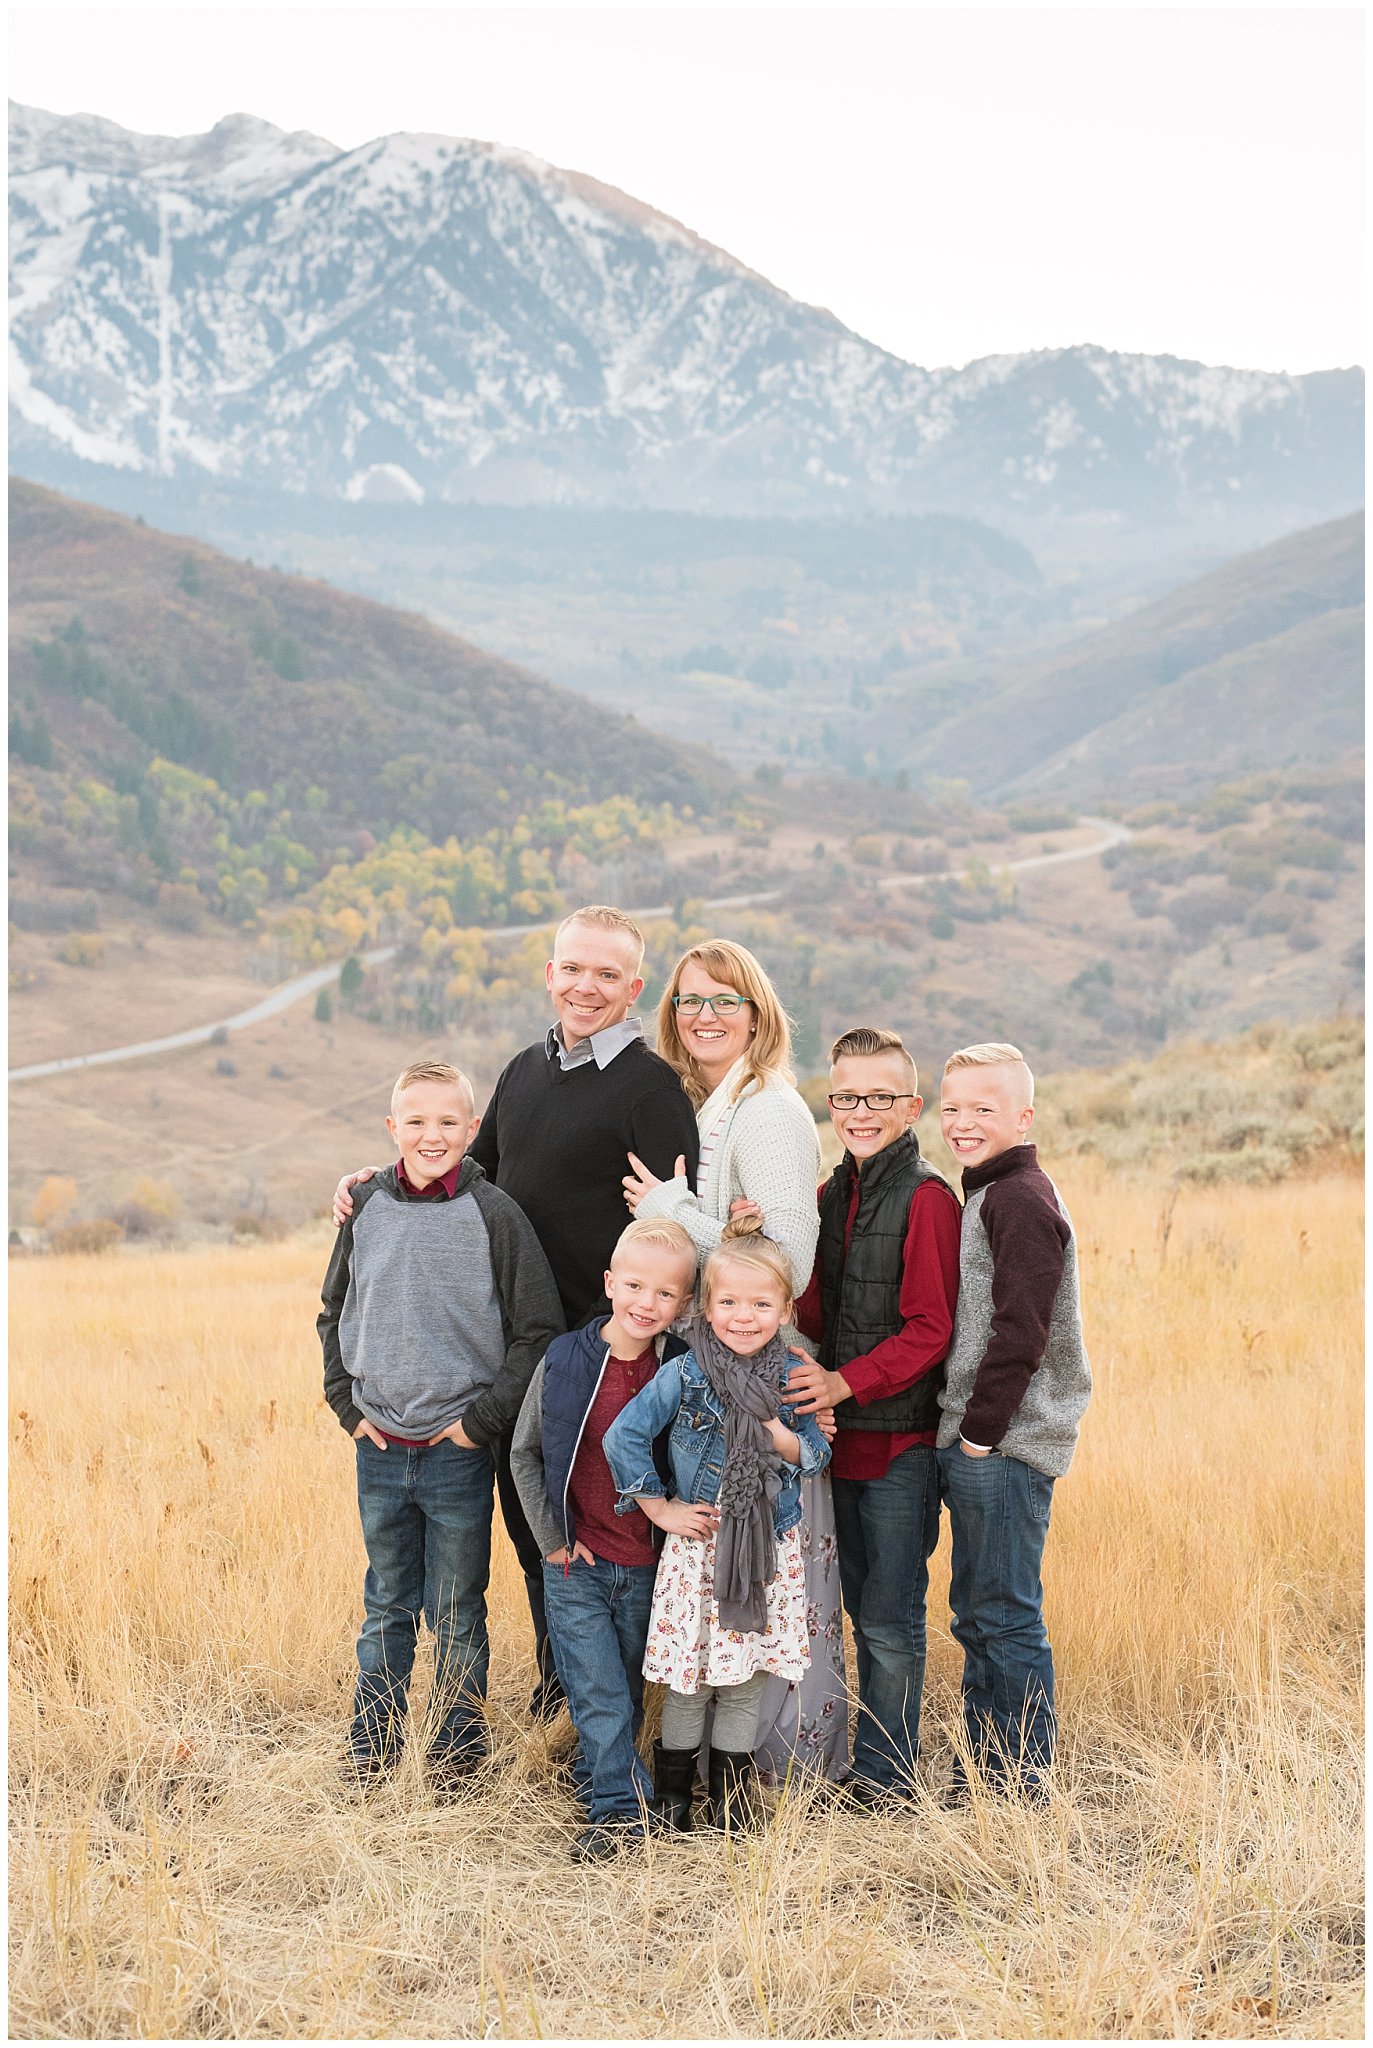 Family of 7 standing in front of snowy mountain peaks | Fall Family Pictures in the Mountains | Snowbasin, Utah | Jessie and Dallin Photography